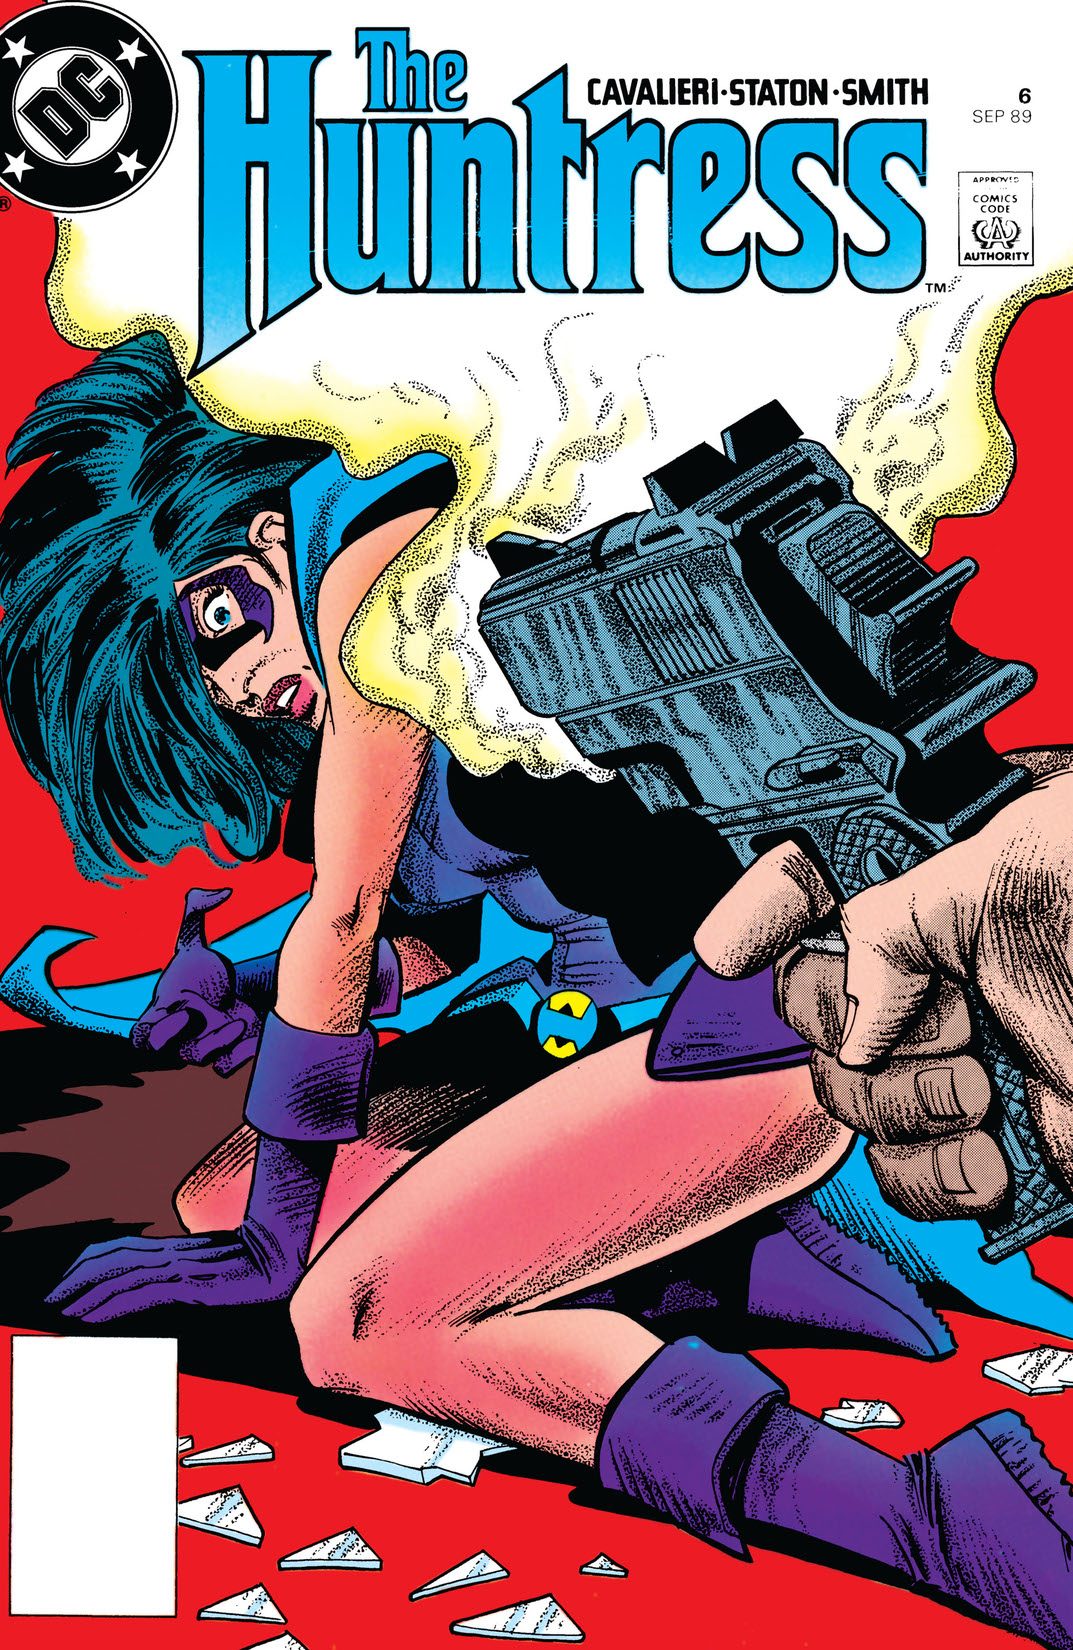 The Huntress (1989-) #6 preview images